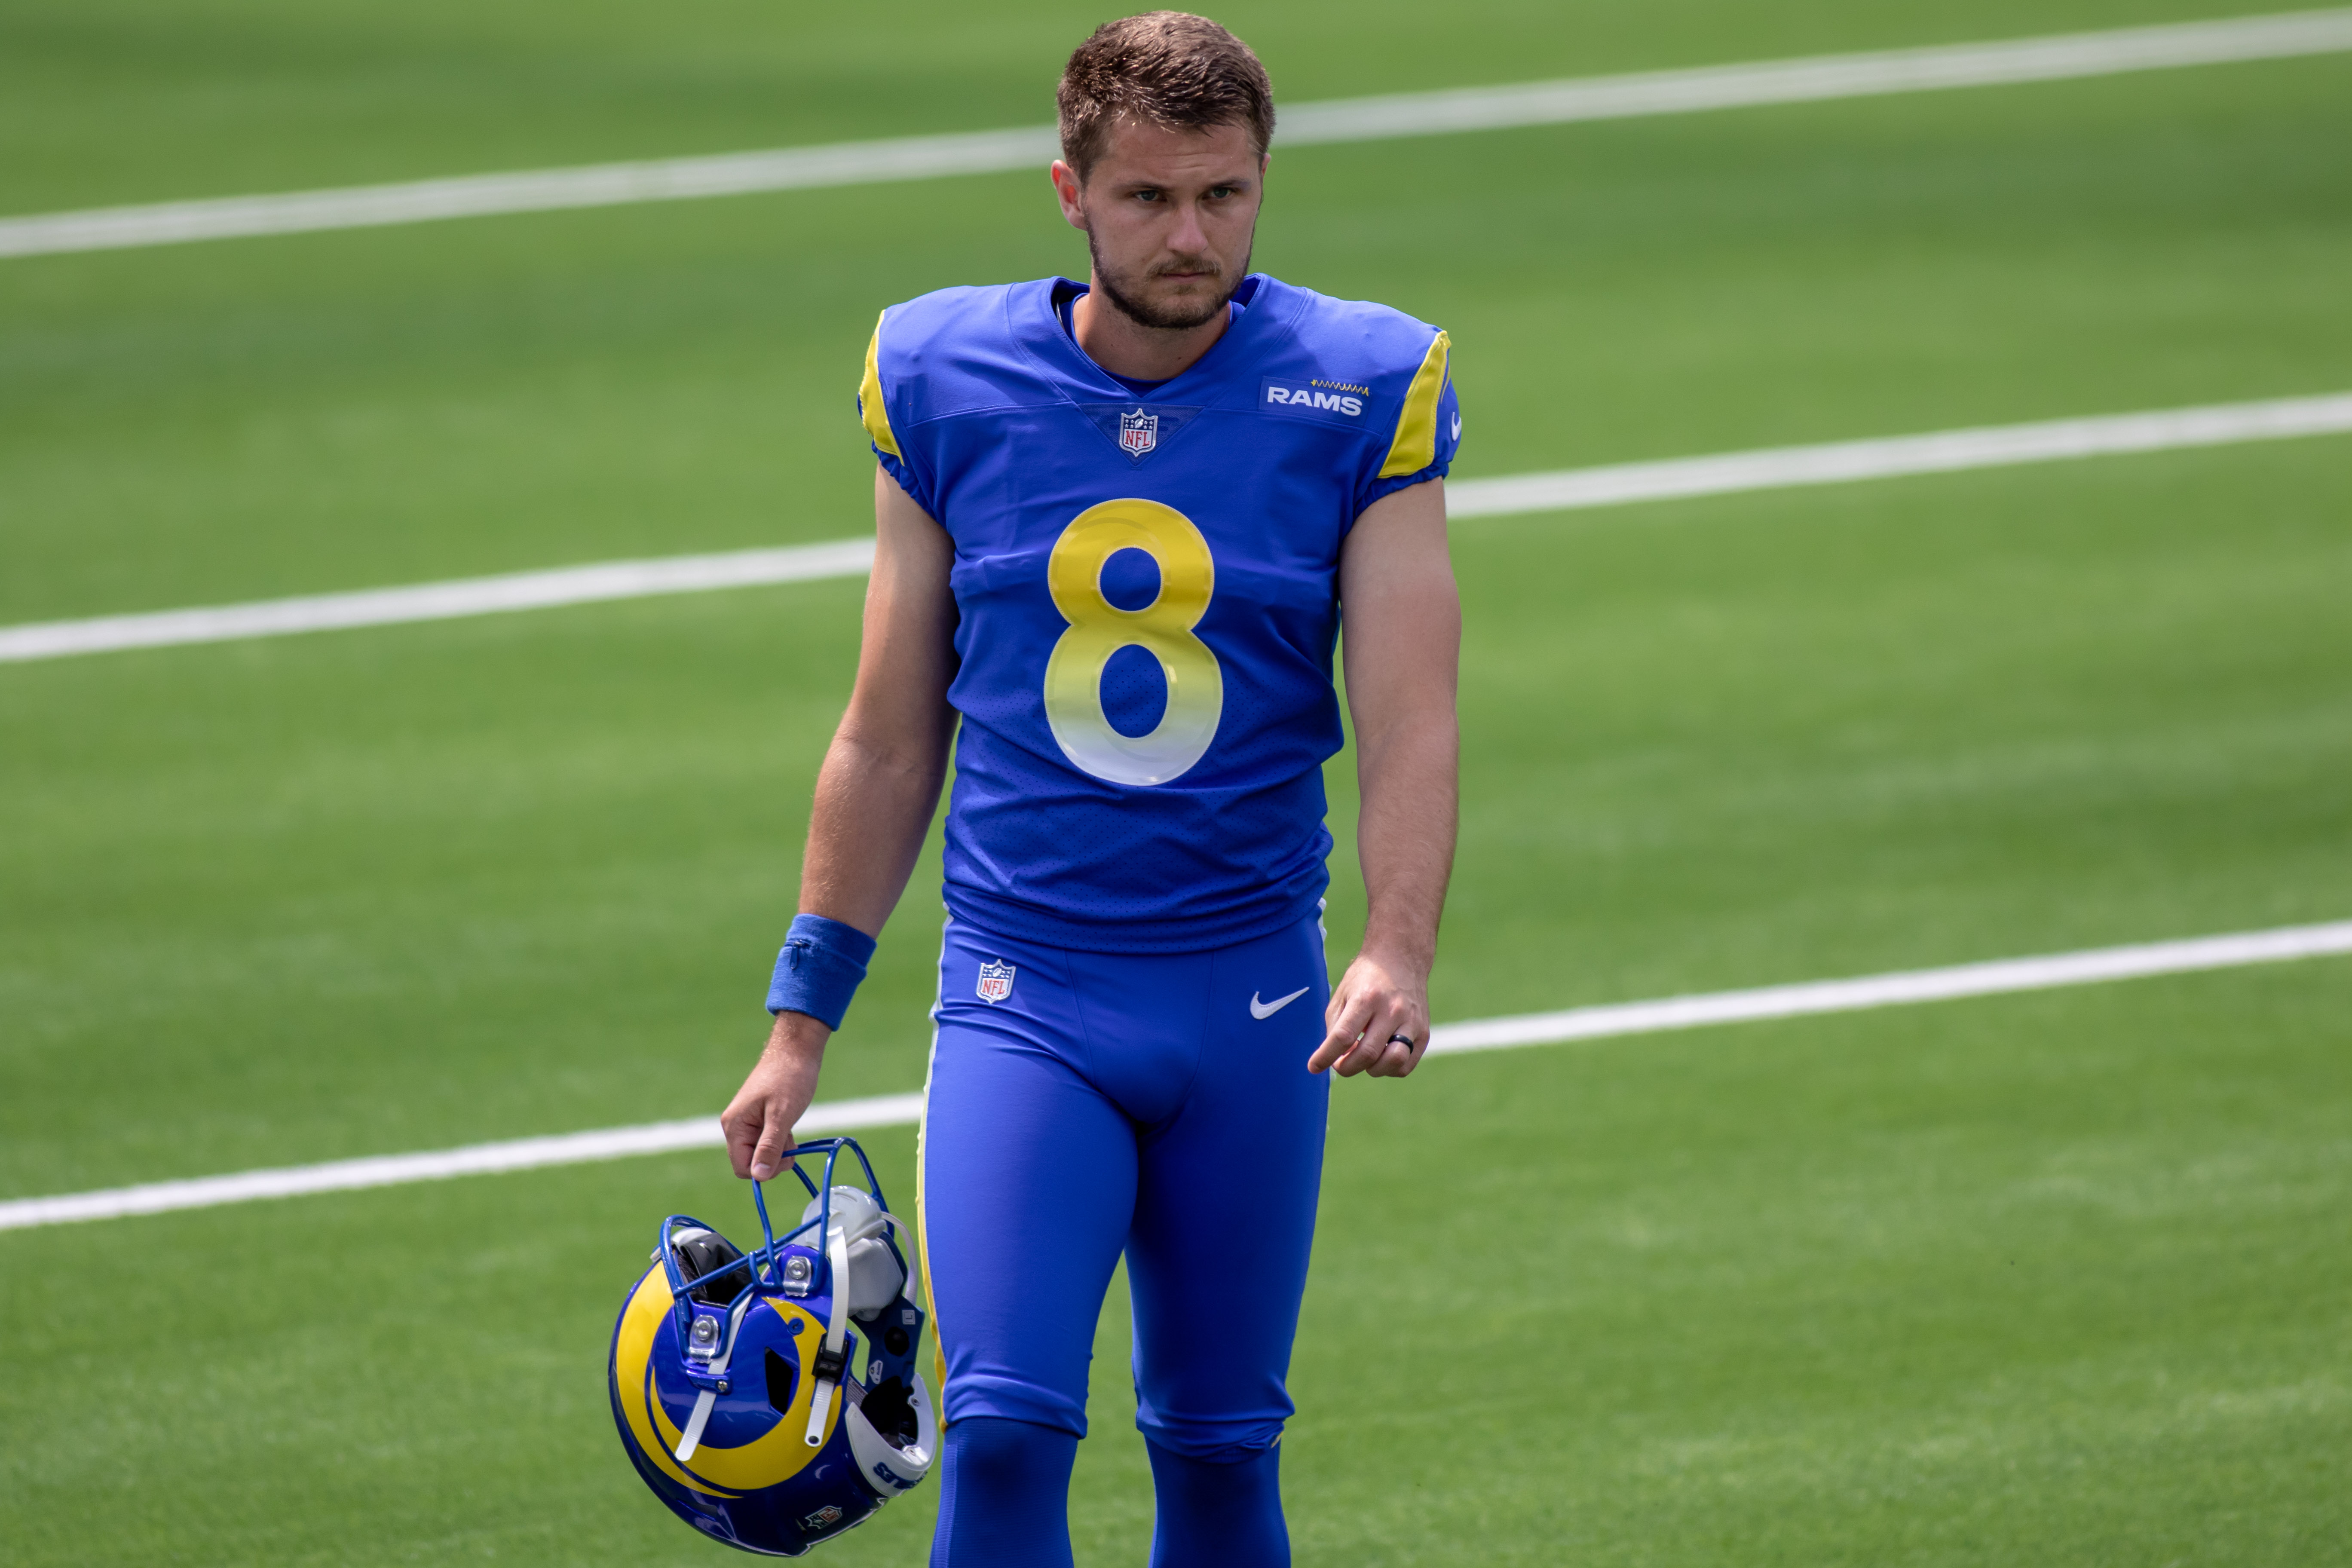 NFL: AUG 29 Rams Scrimmage